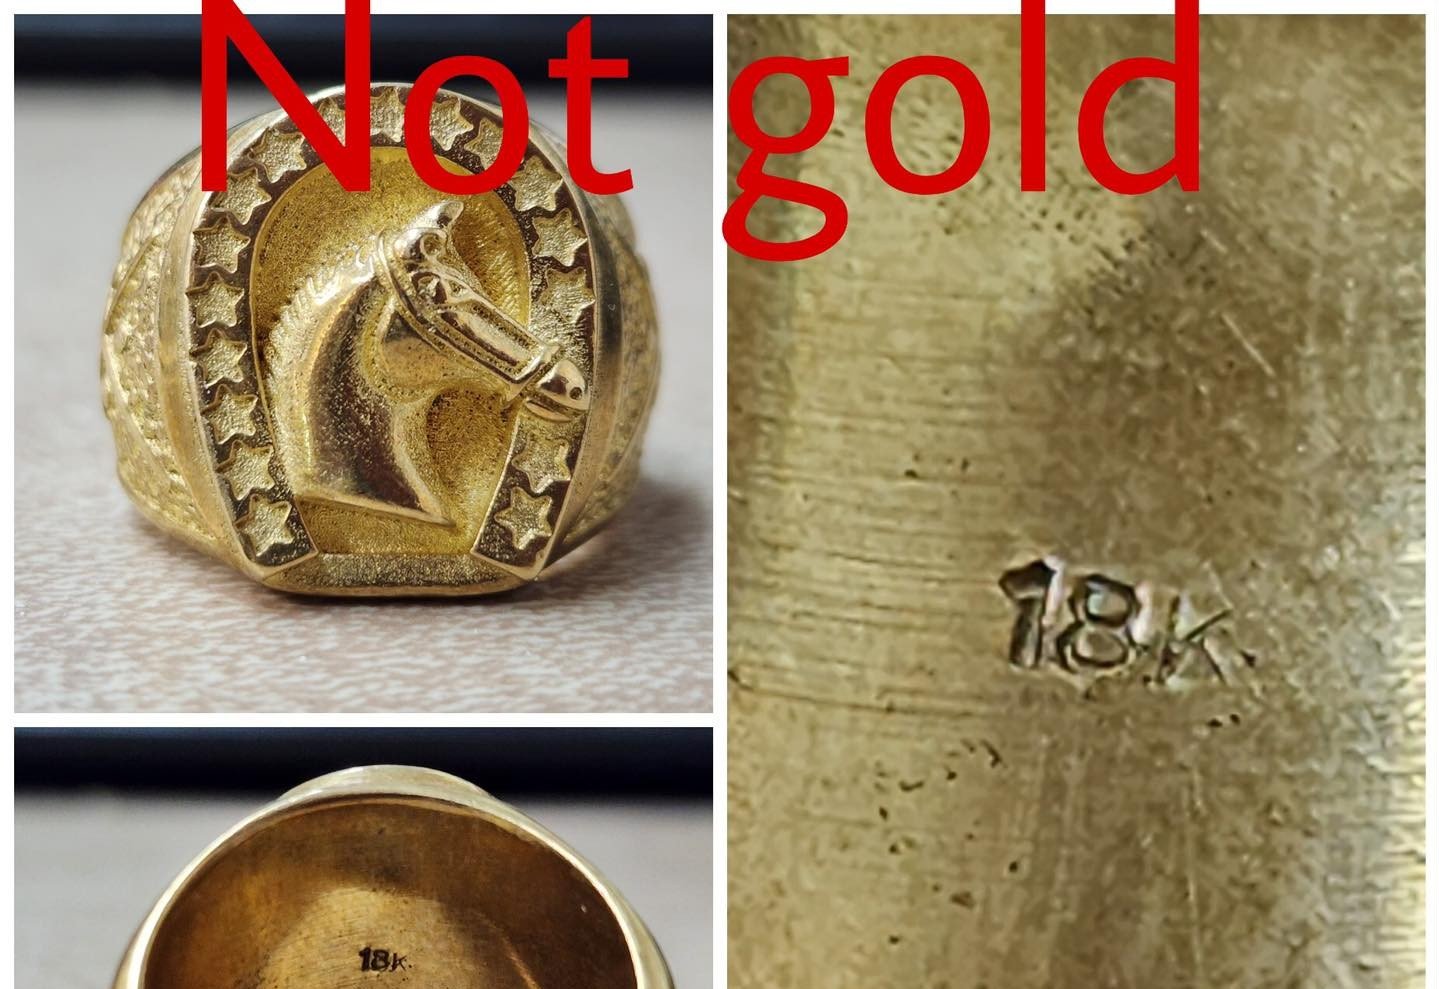 Georgetown police, local jeweler warn of fake gold scam